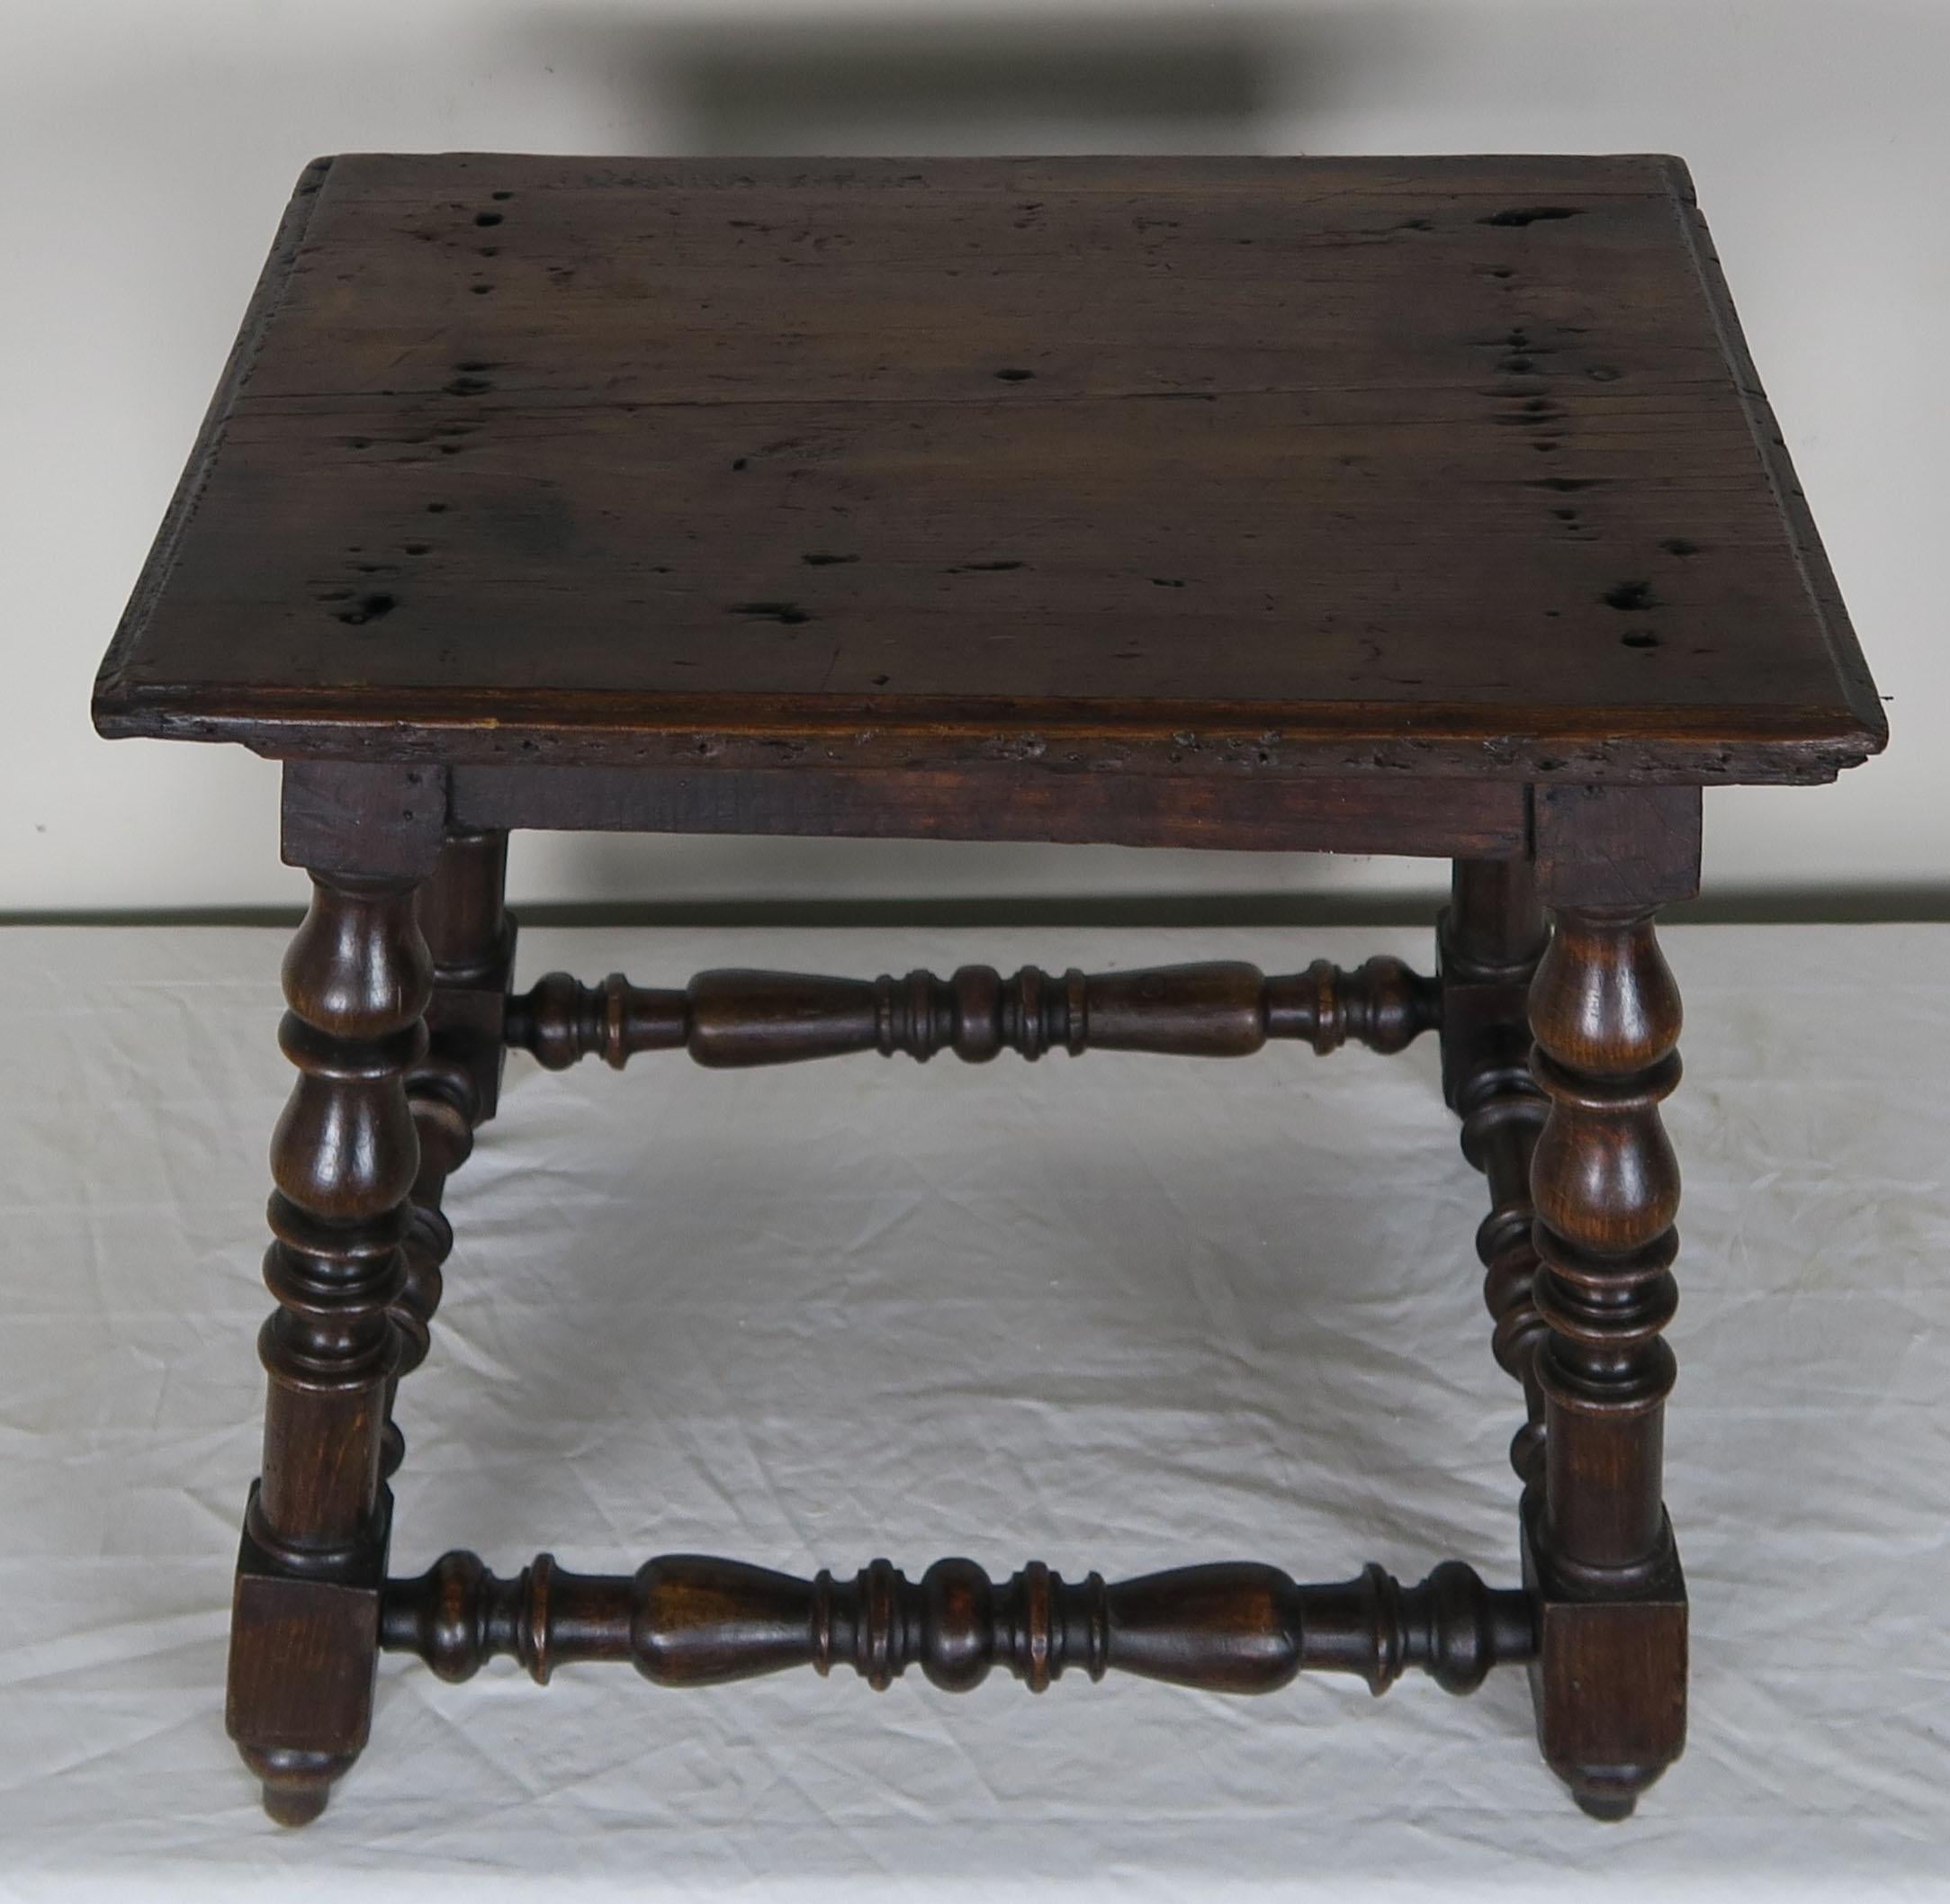 19th century Spanish walnut table standing on four turned legs that are connected by a bottom stretcher.